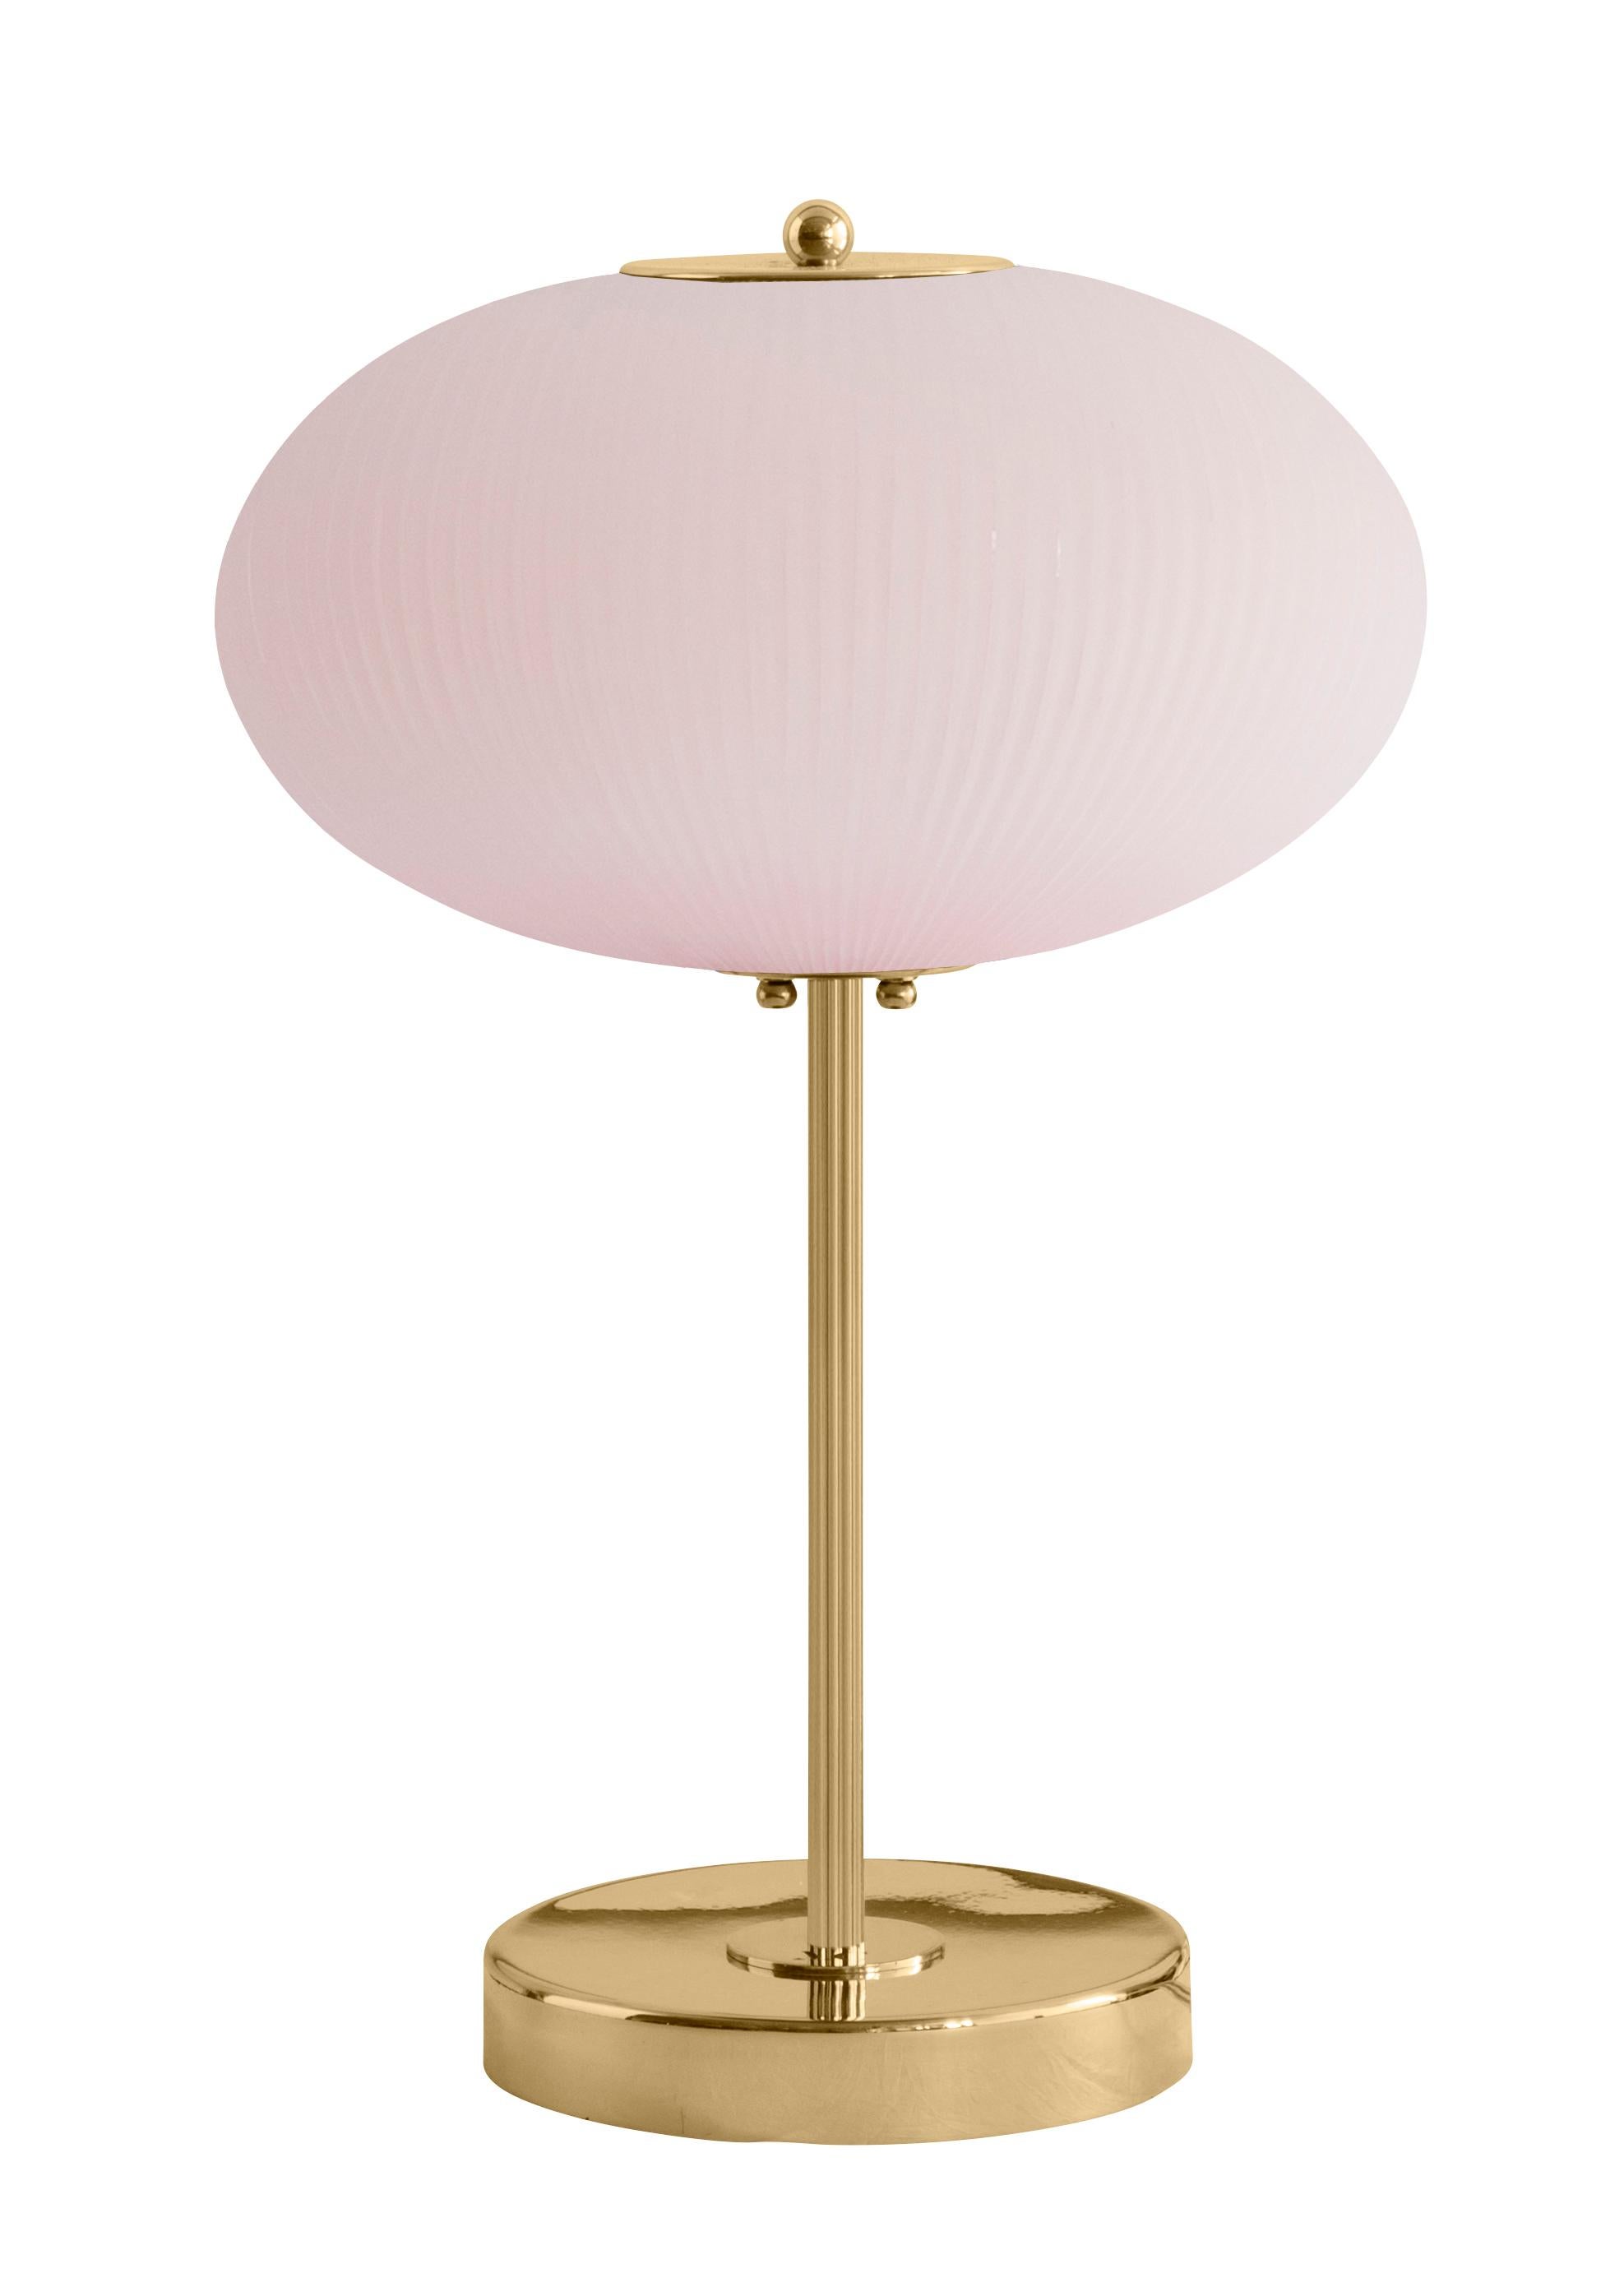 Table lamp China 07 by Magic Circus Editions
Dimensions: H 50 x W 32 x D 32 cm
Materials: Brass, mouth blown glass sculpted with a diamond saw
Colour: soft rose

Available finishes: Brass, nickel
Available colours: enamel soft white, soft